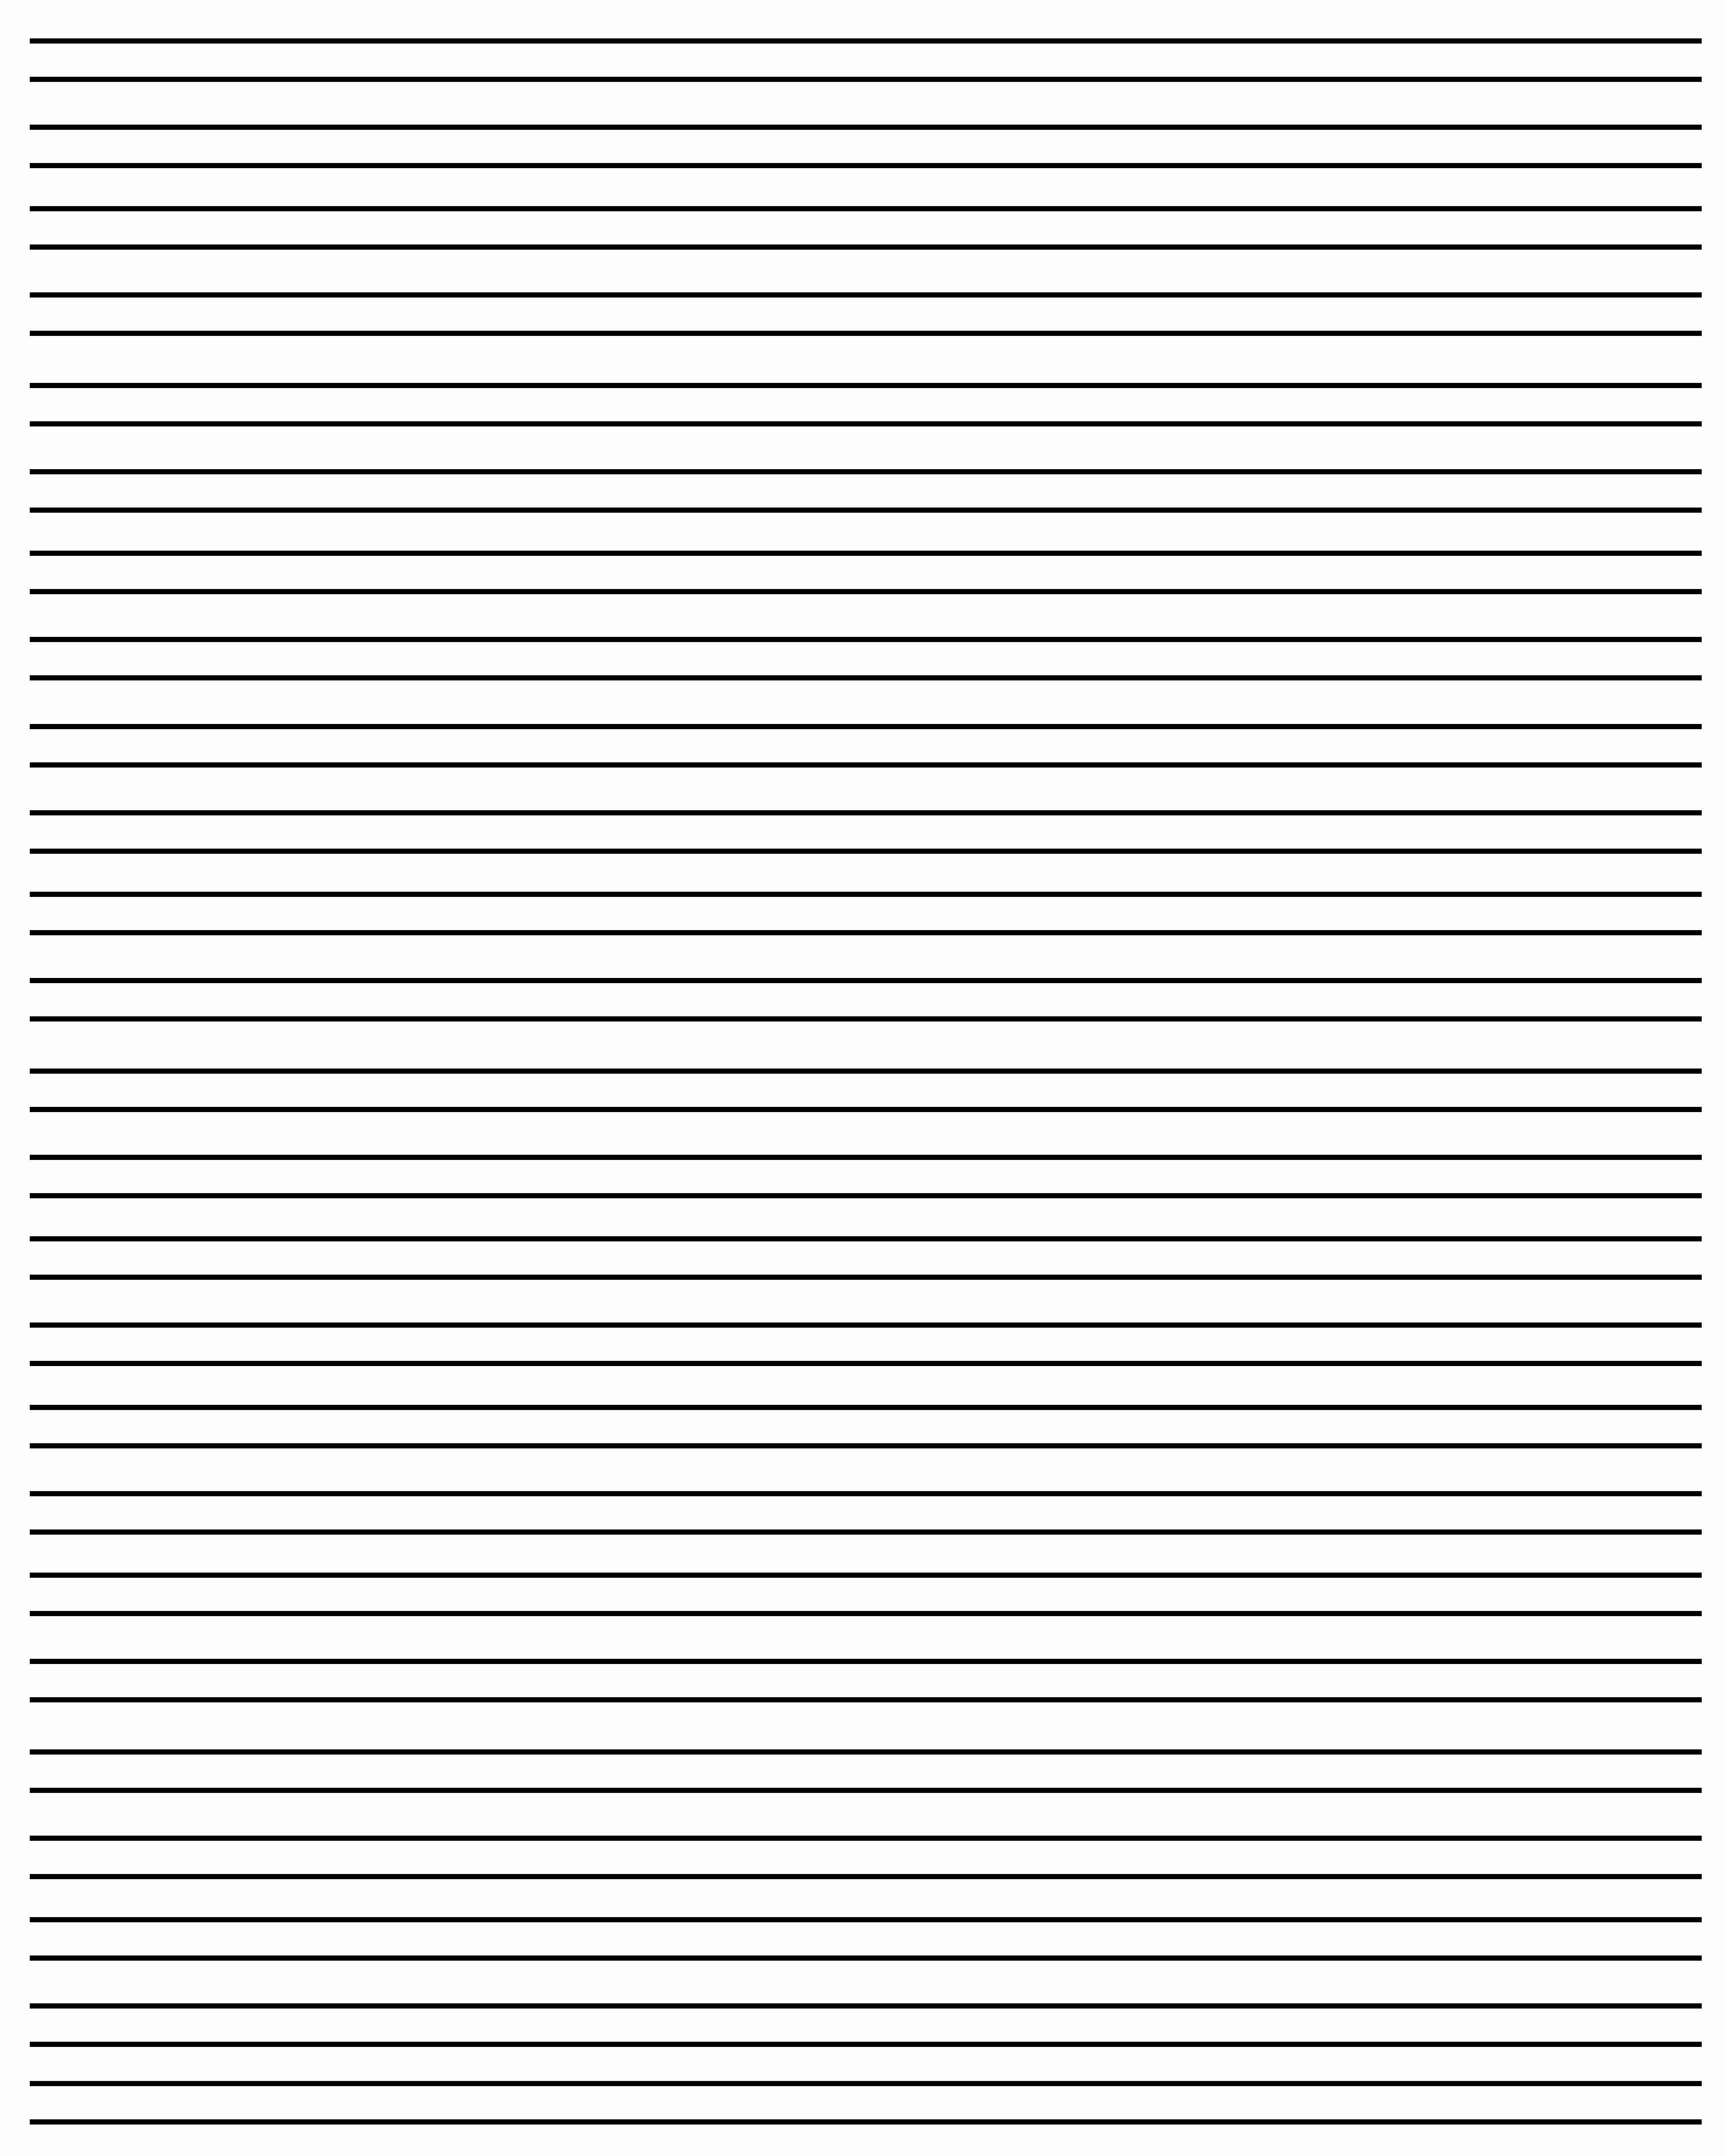 Free Lined Paper to Print Awesome 20 Free Printable Blank Lined Paper Template In Pdf